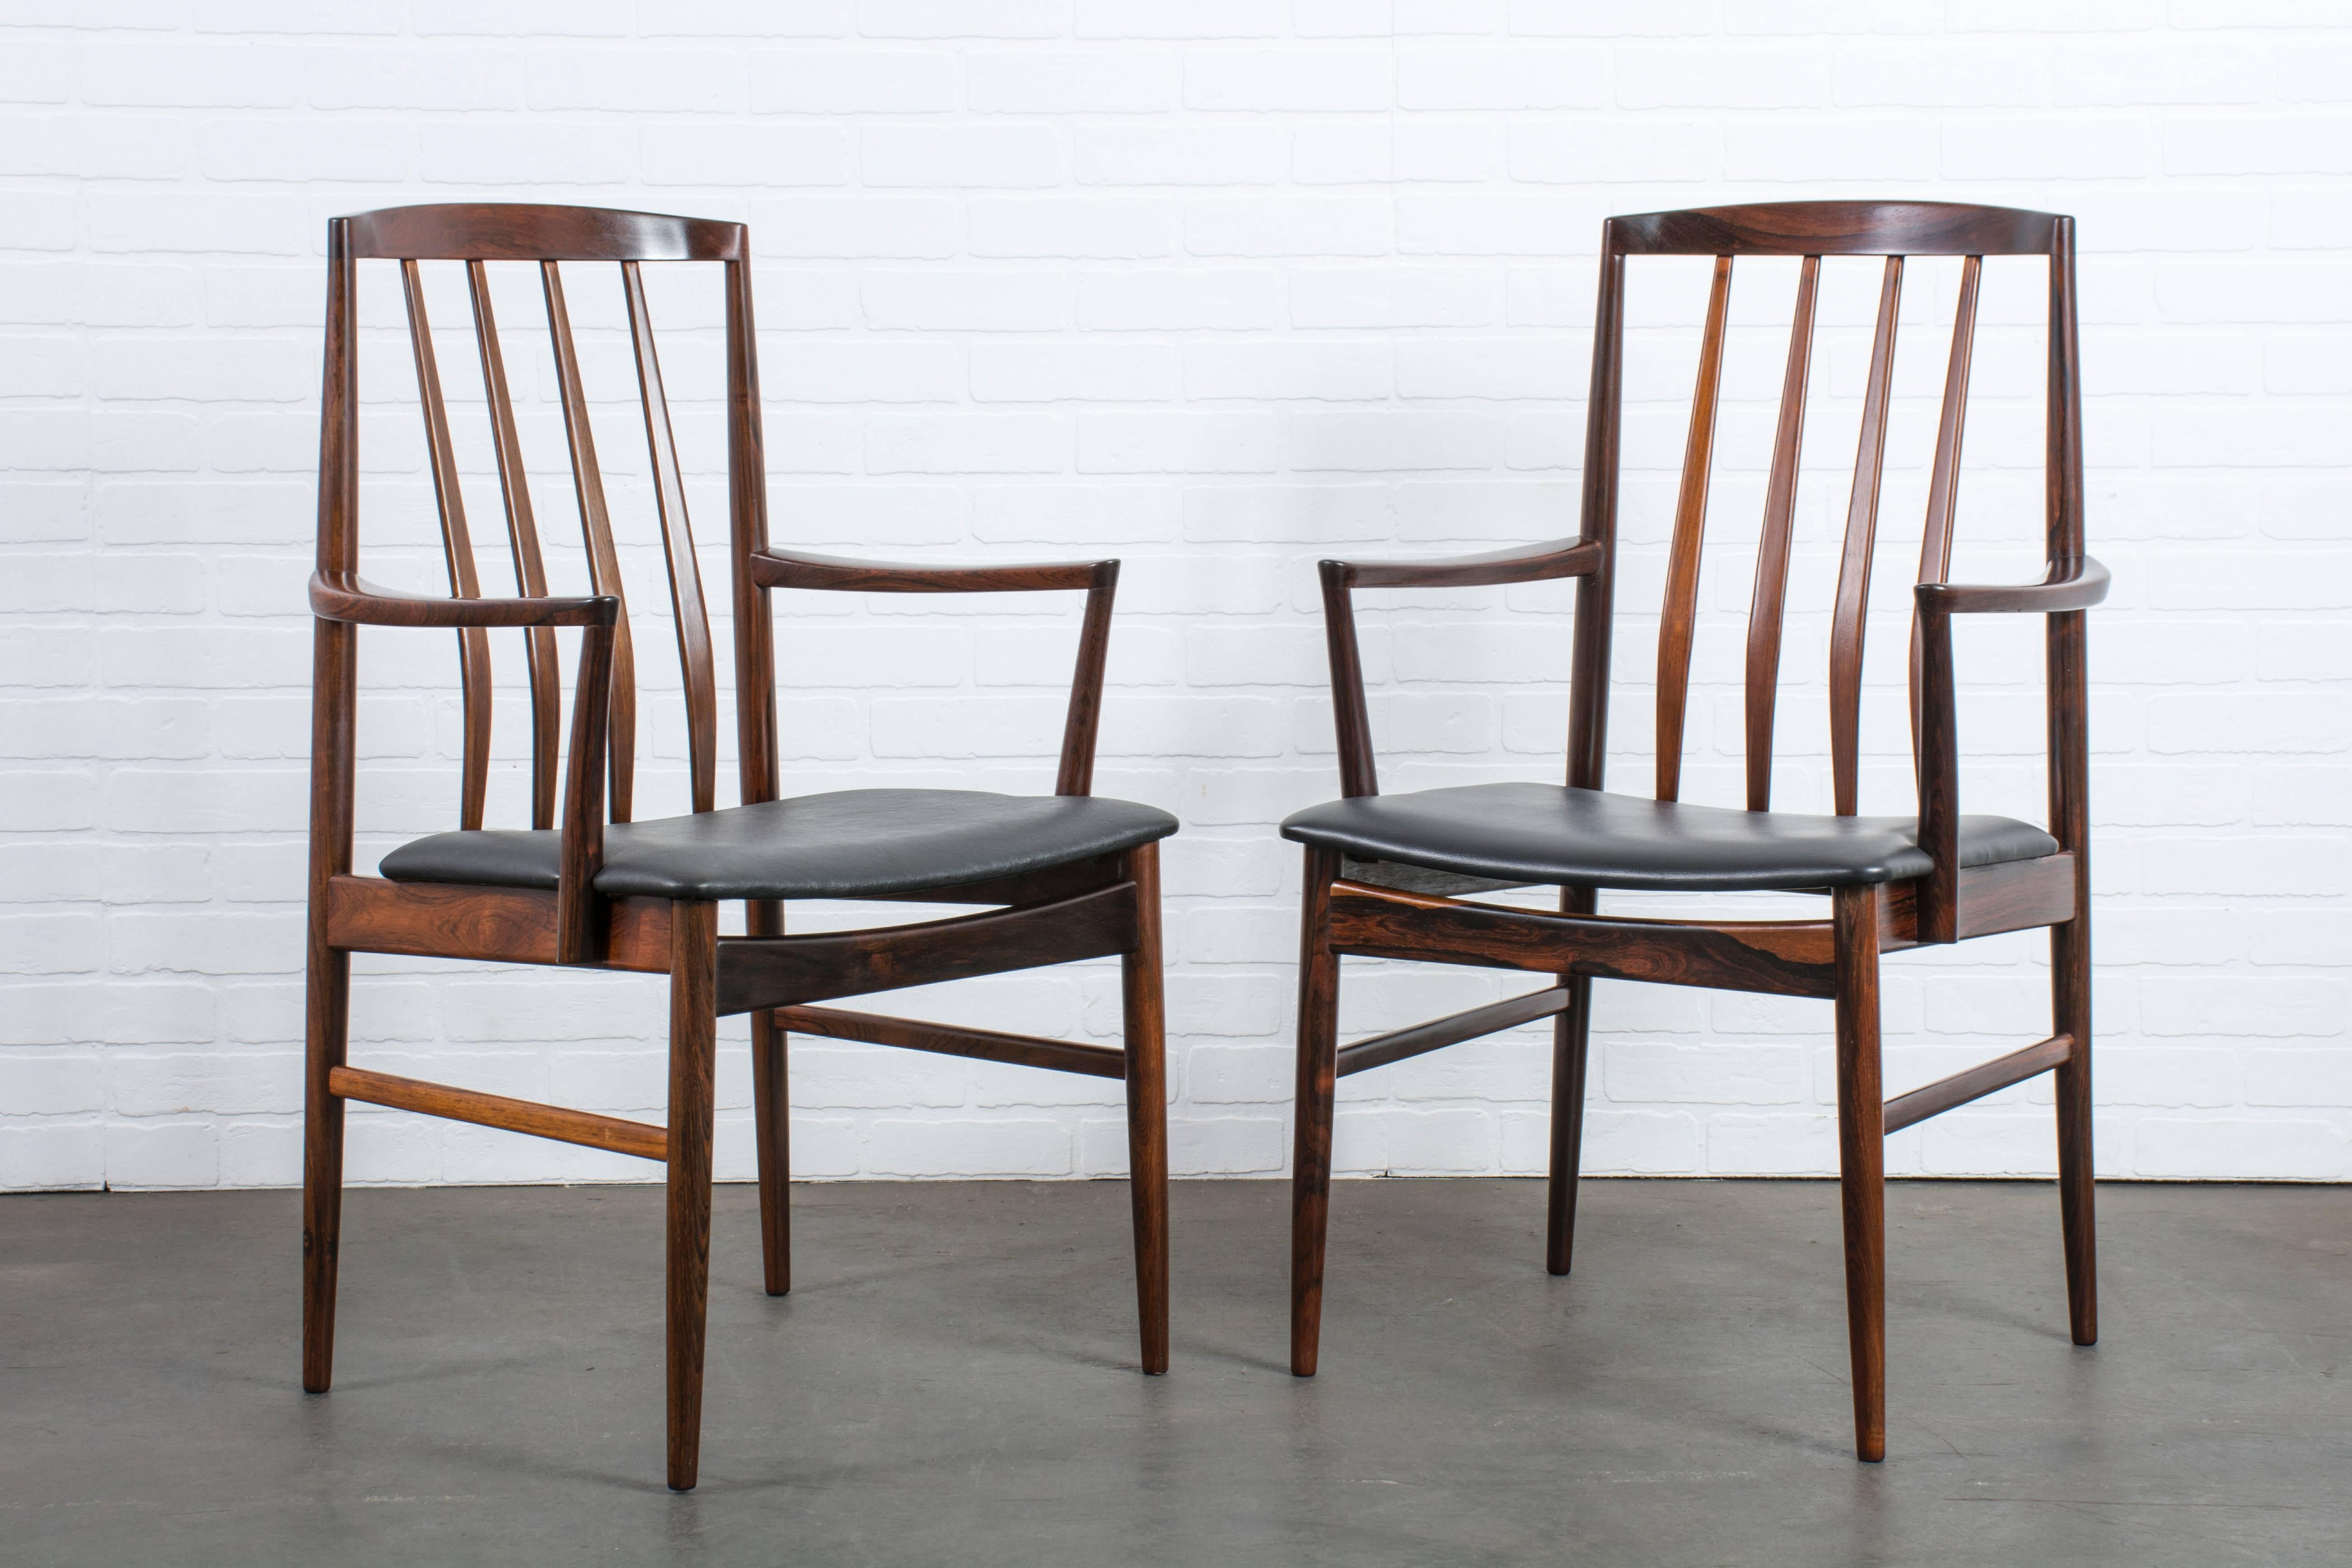 This is a set of six vintage Mid-Century solid rosewood dining chairs that includes two armchairs. Original black Naugahyde upholstery.
The armchairs are 21.5